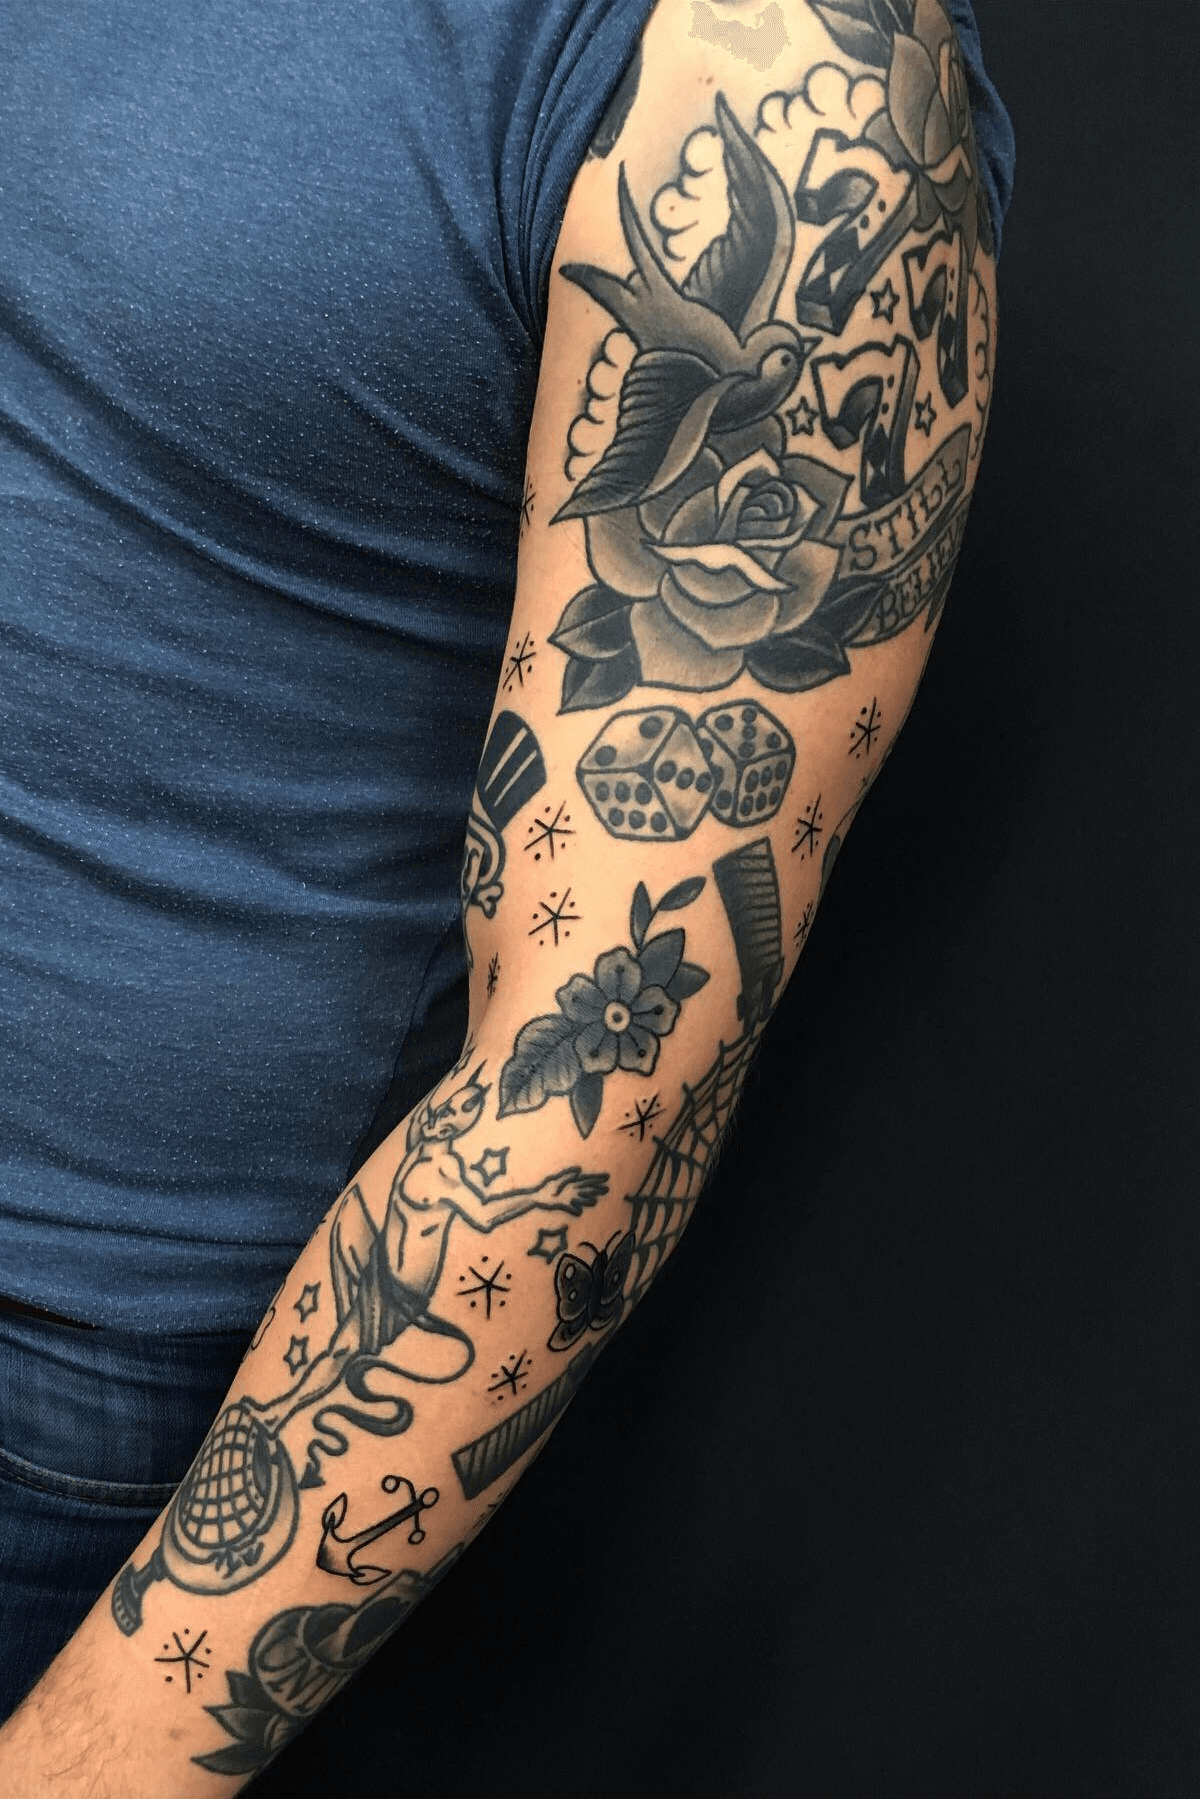 Share more than 73 patch sleeve tattoo super hot  thtantai2